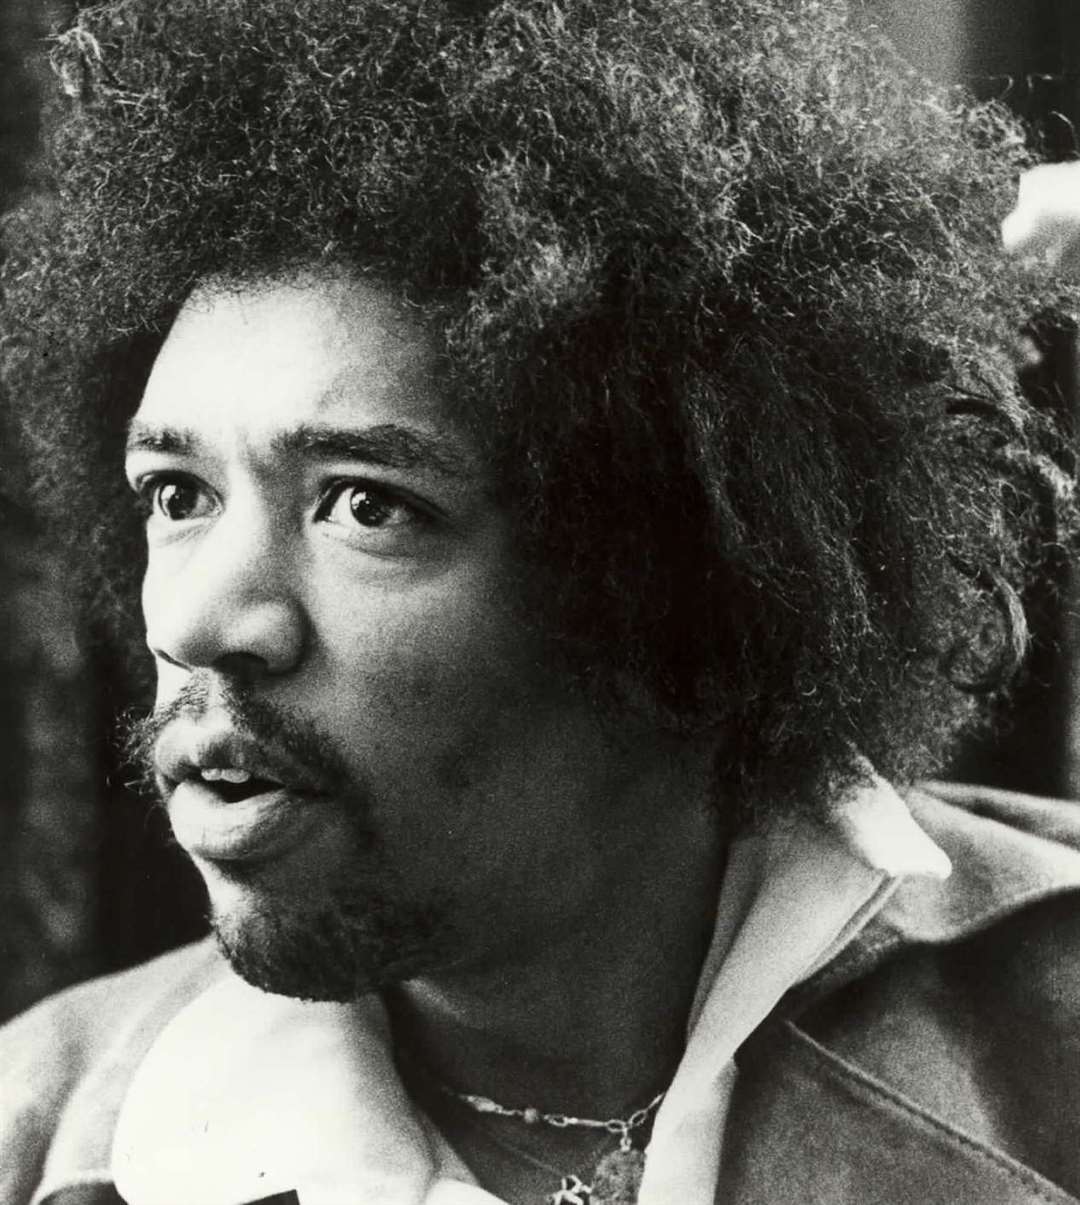 Dave went on tour with Jimi Hendrix